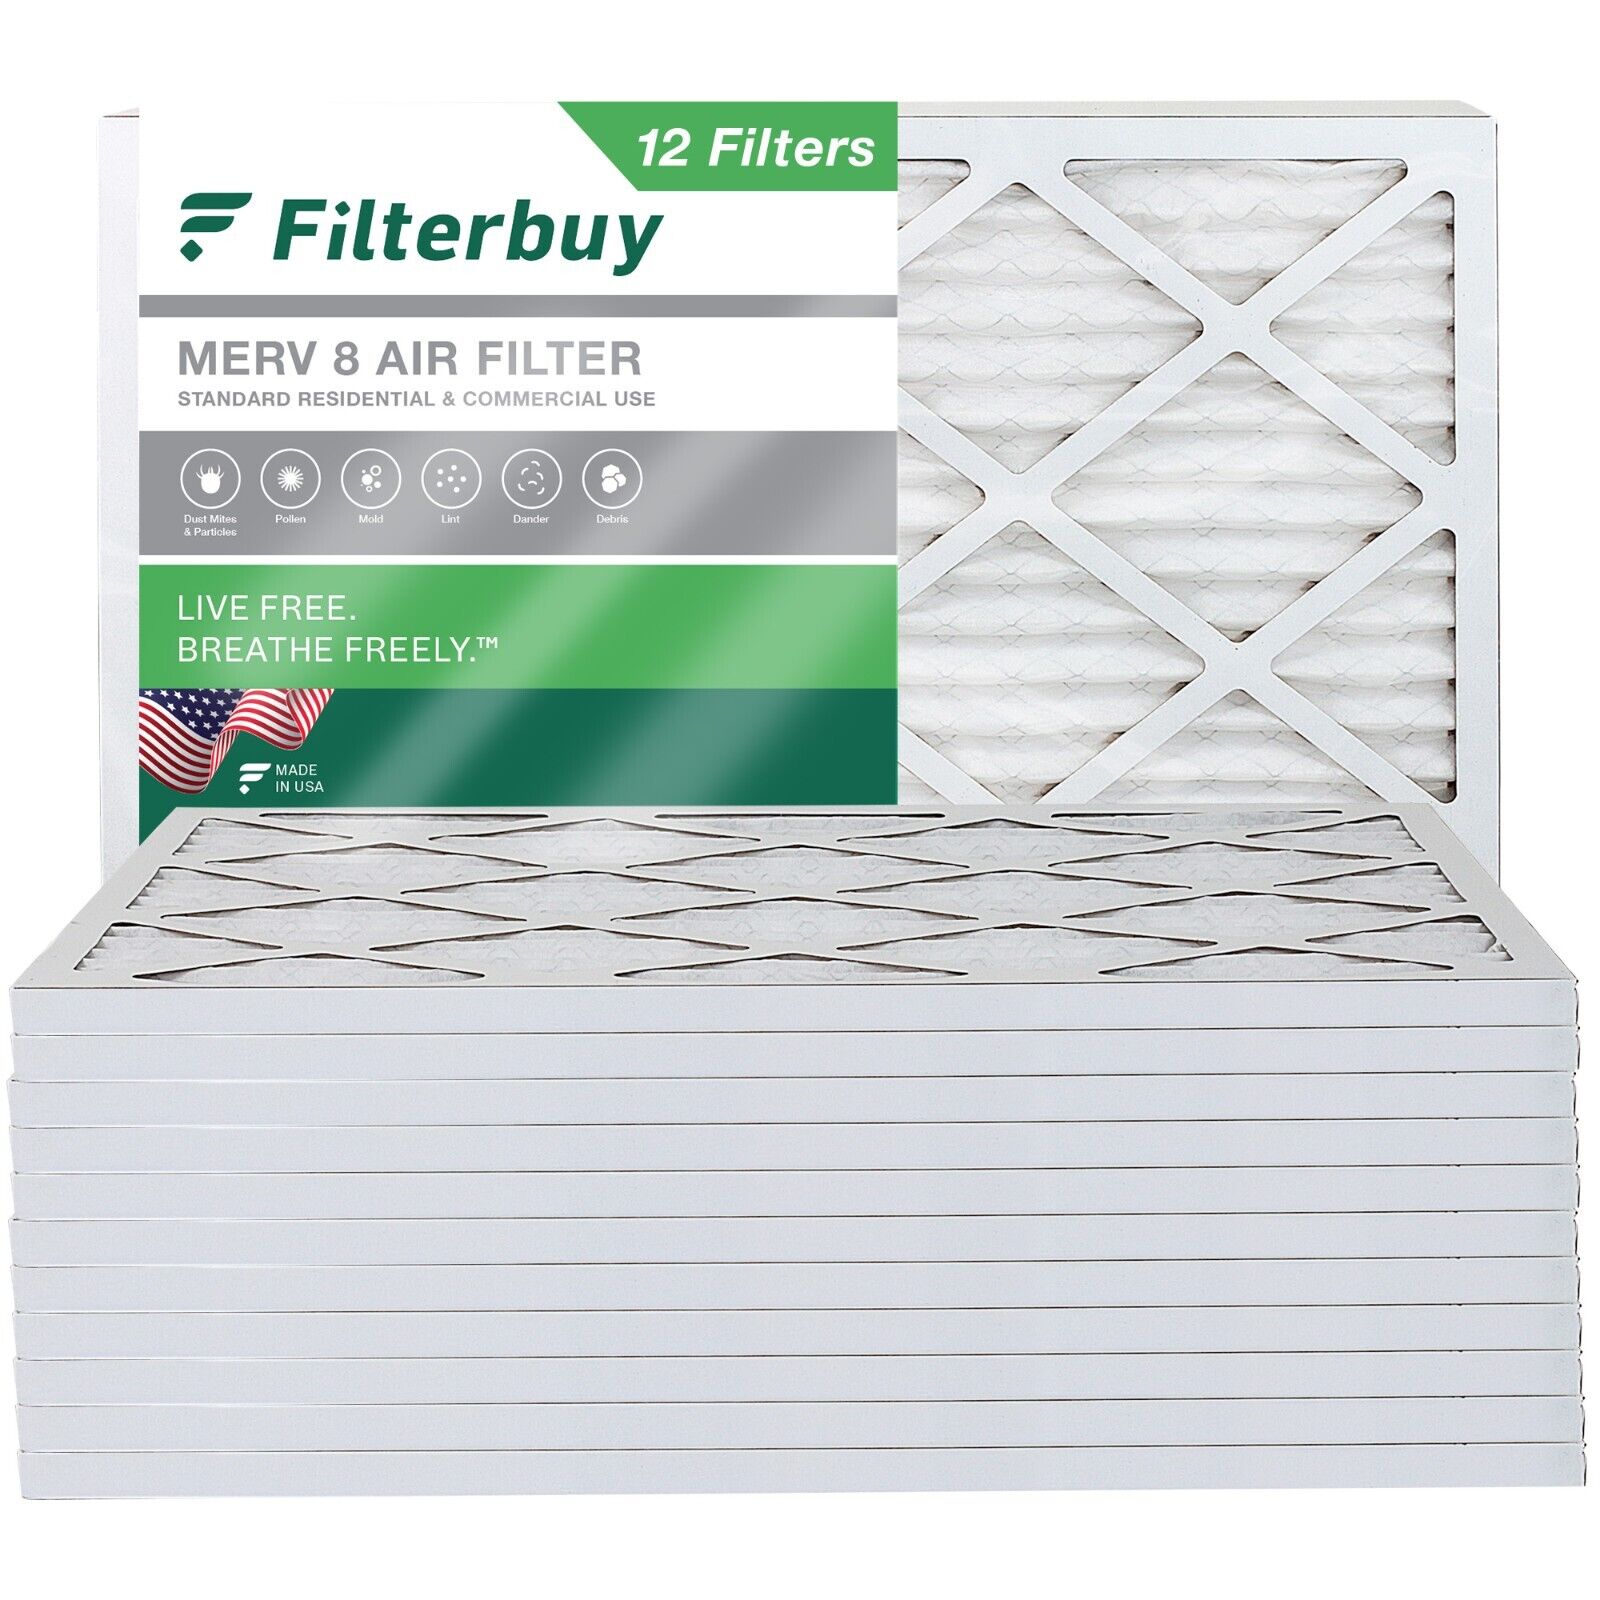 Filterbuy 20x25x1 Pleated Air Filters, Replacement for HVAC AC Furnace (MERV 8)